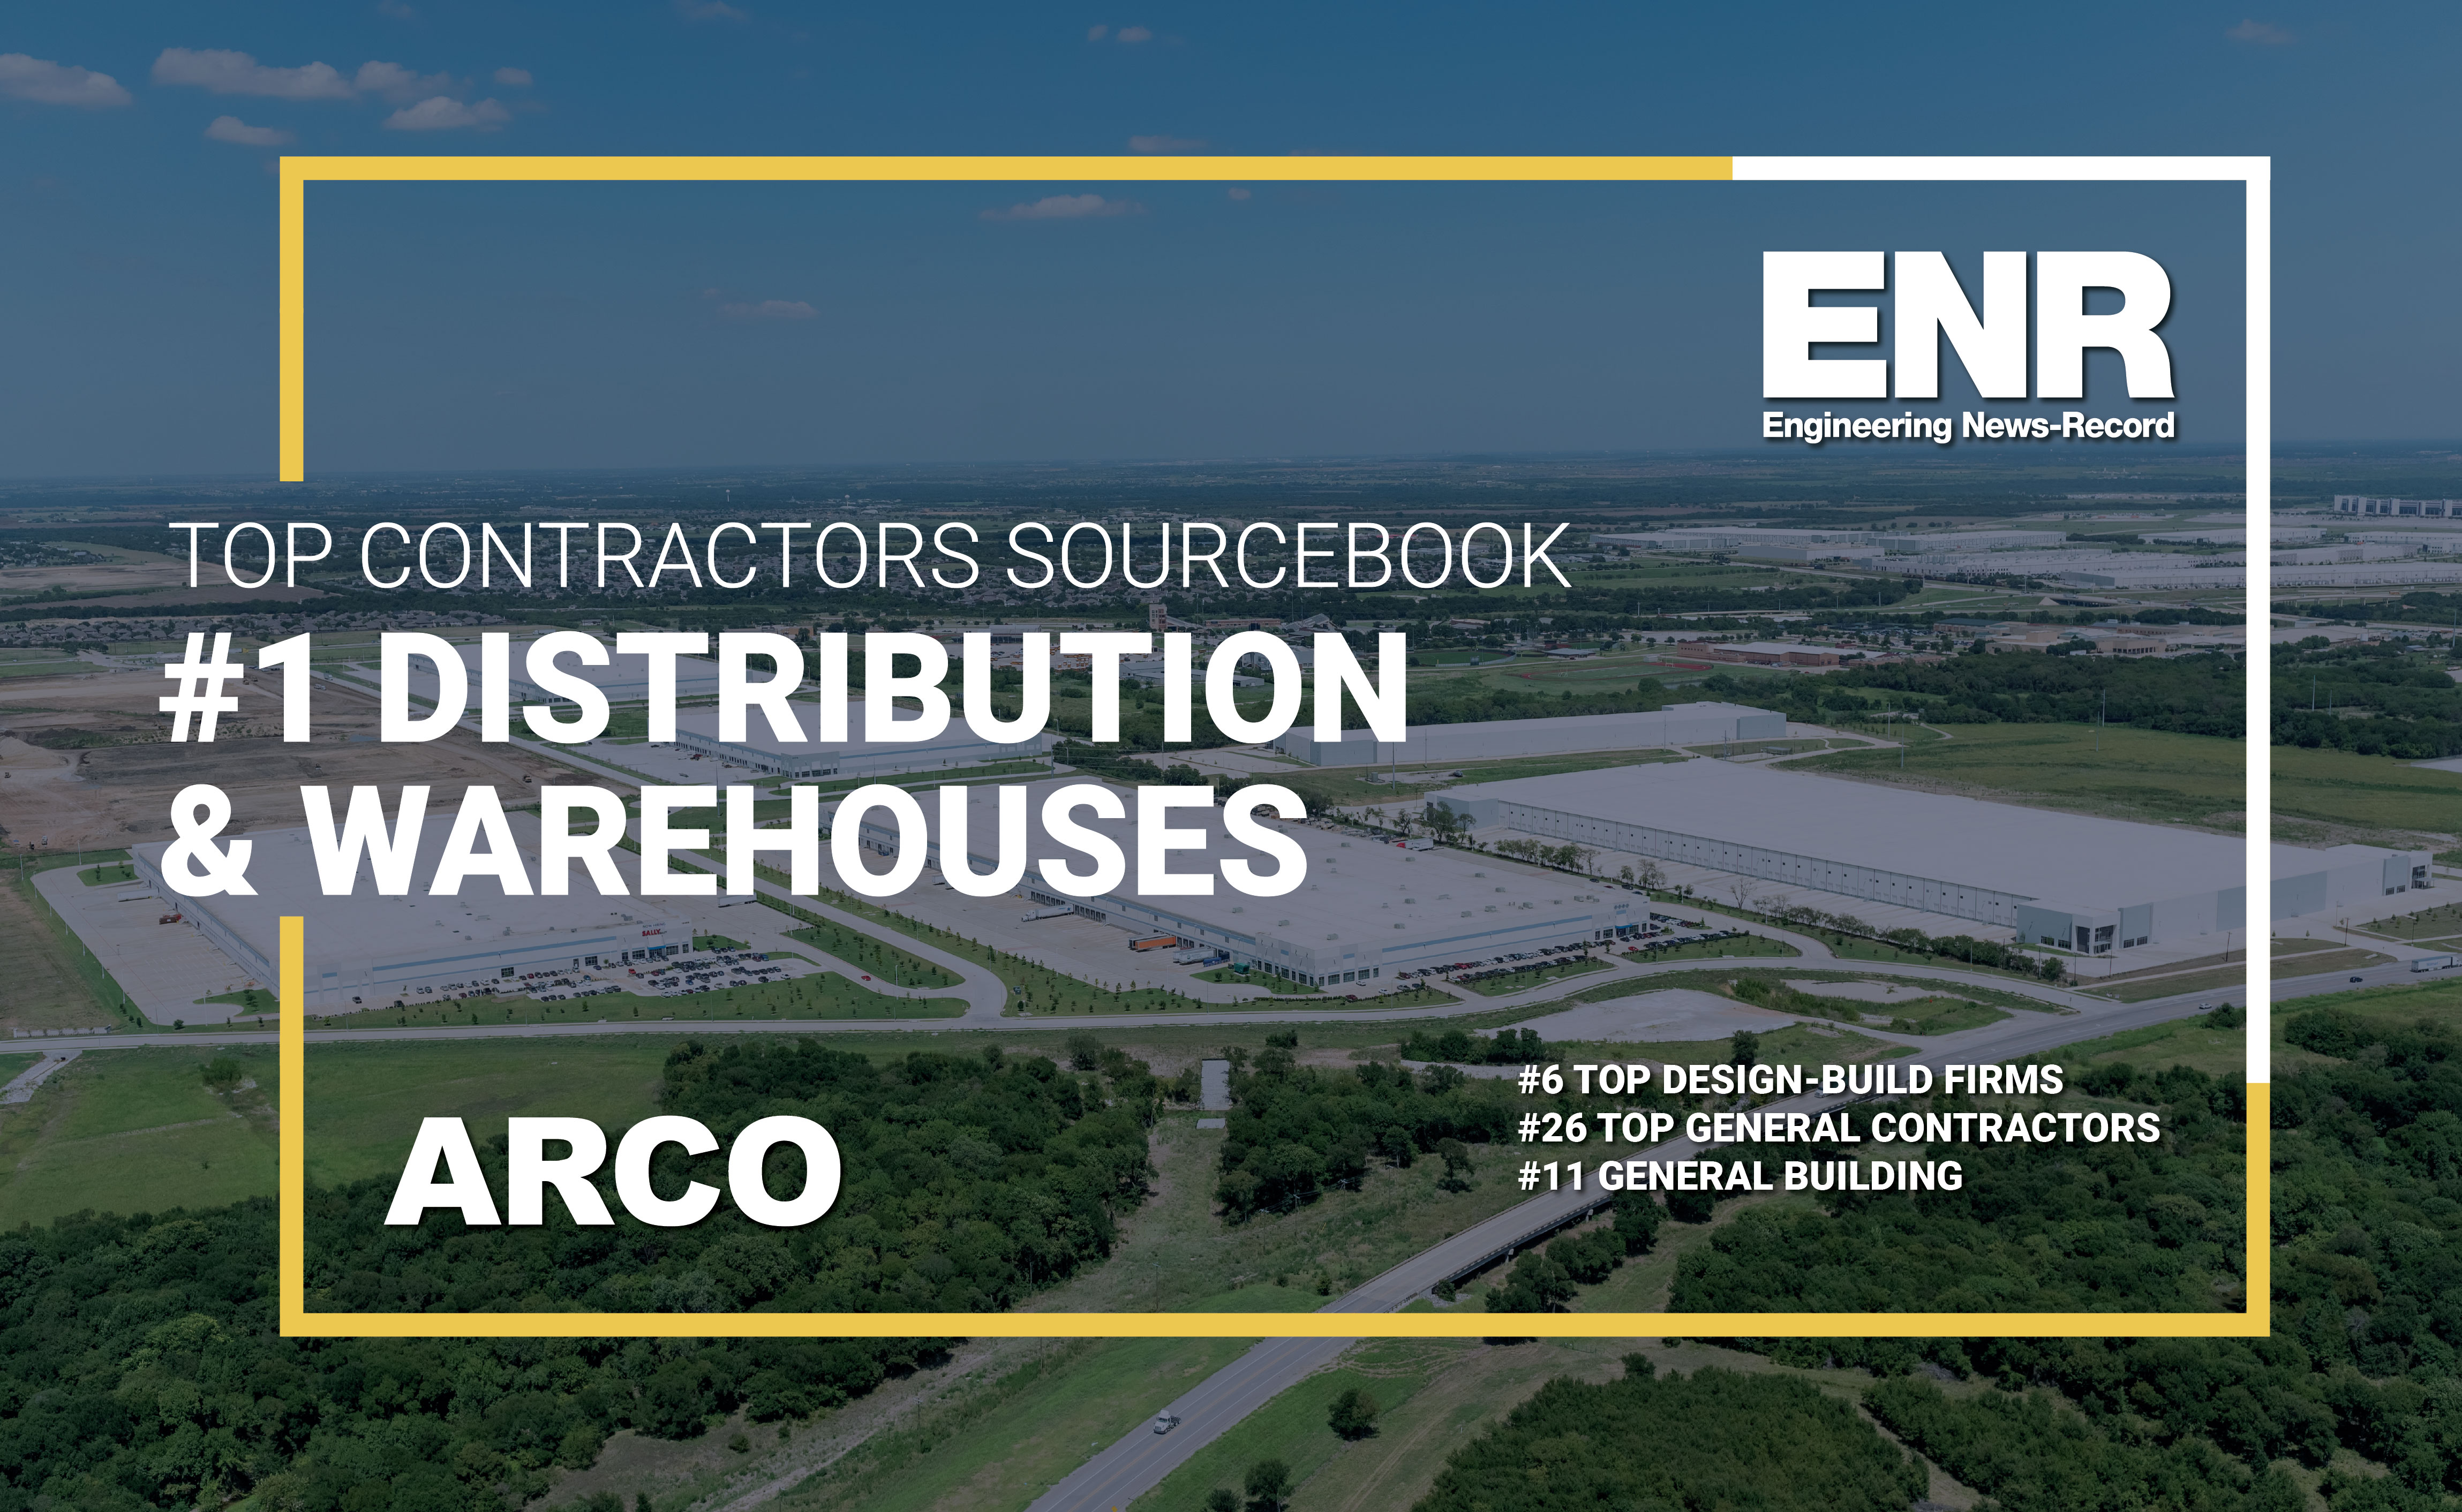 ARCO Ranked Largest Domestic Builder of Distribution & Warehouse Facilities